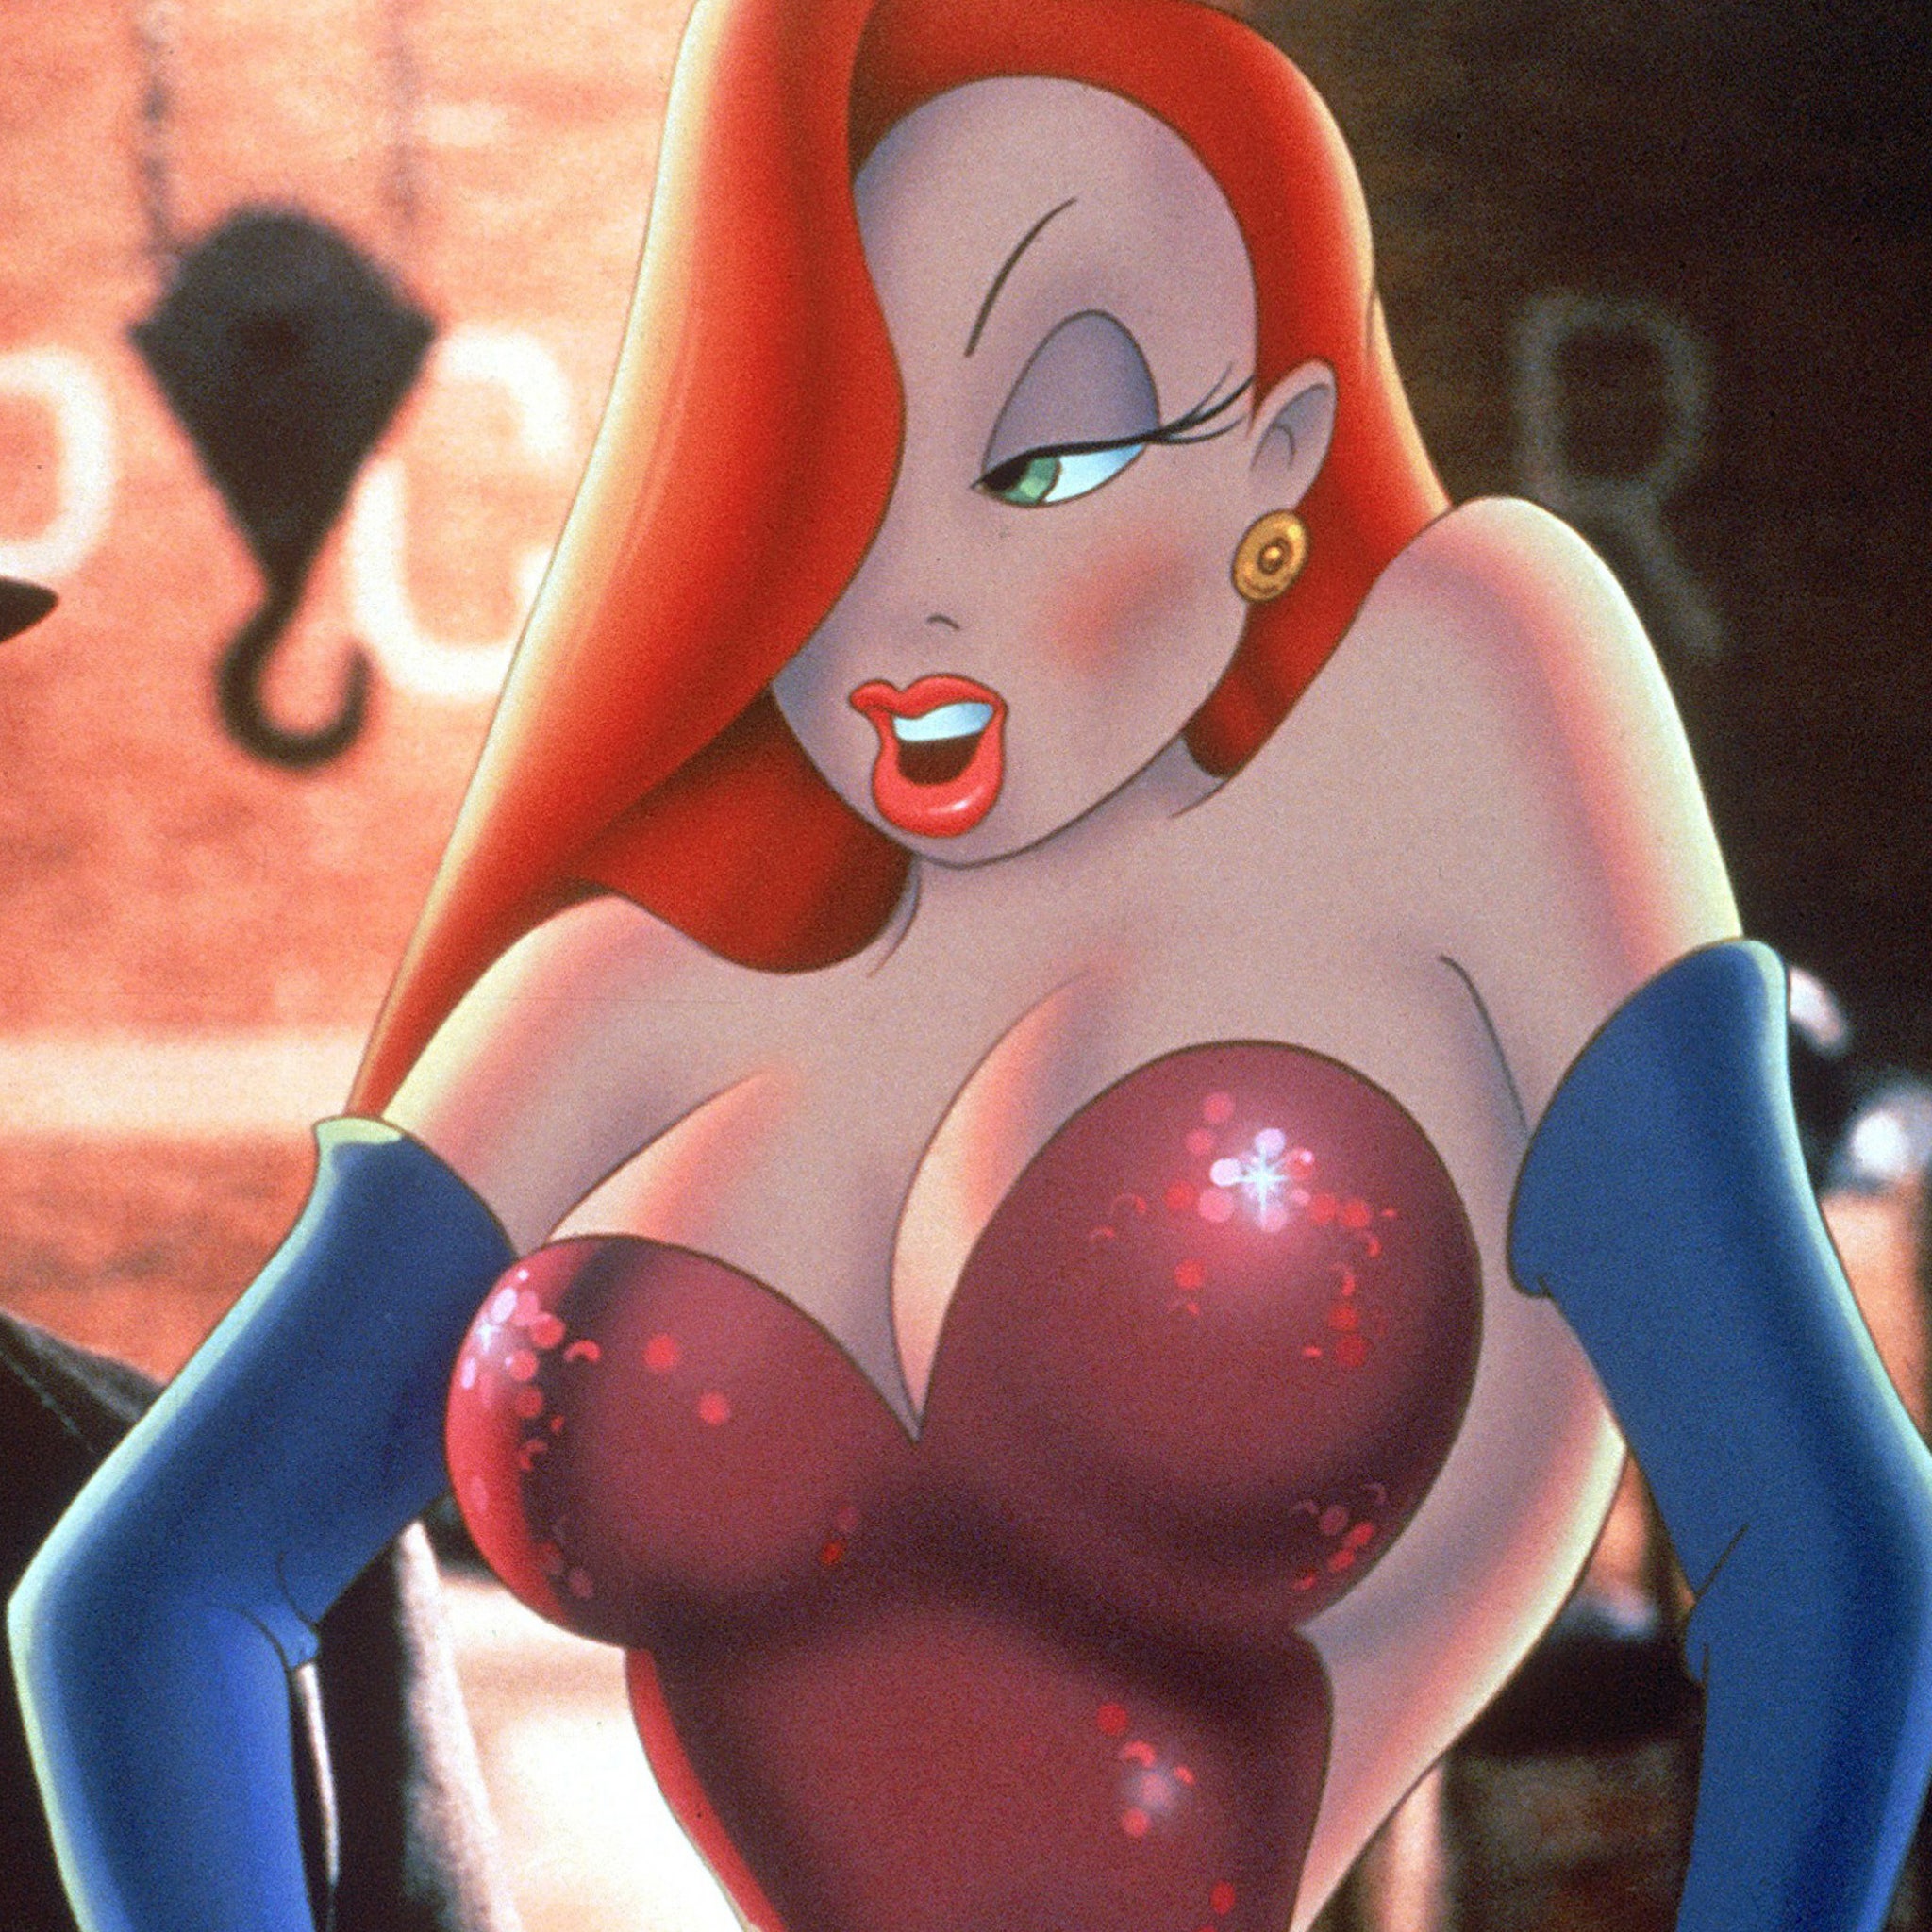 danny mcalinden recommends Jessica Rabbit Sexy Game